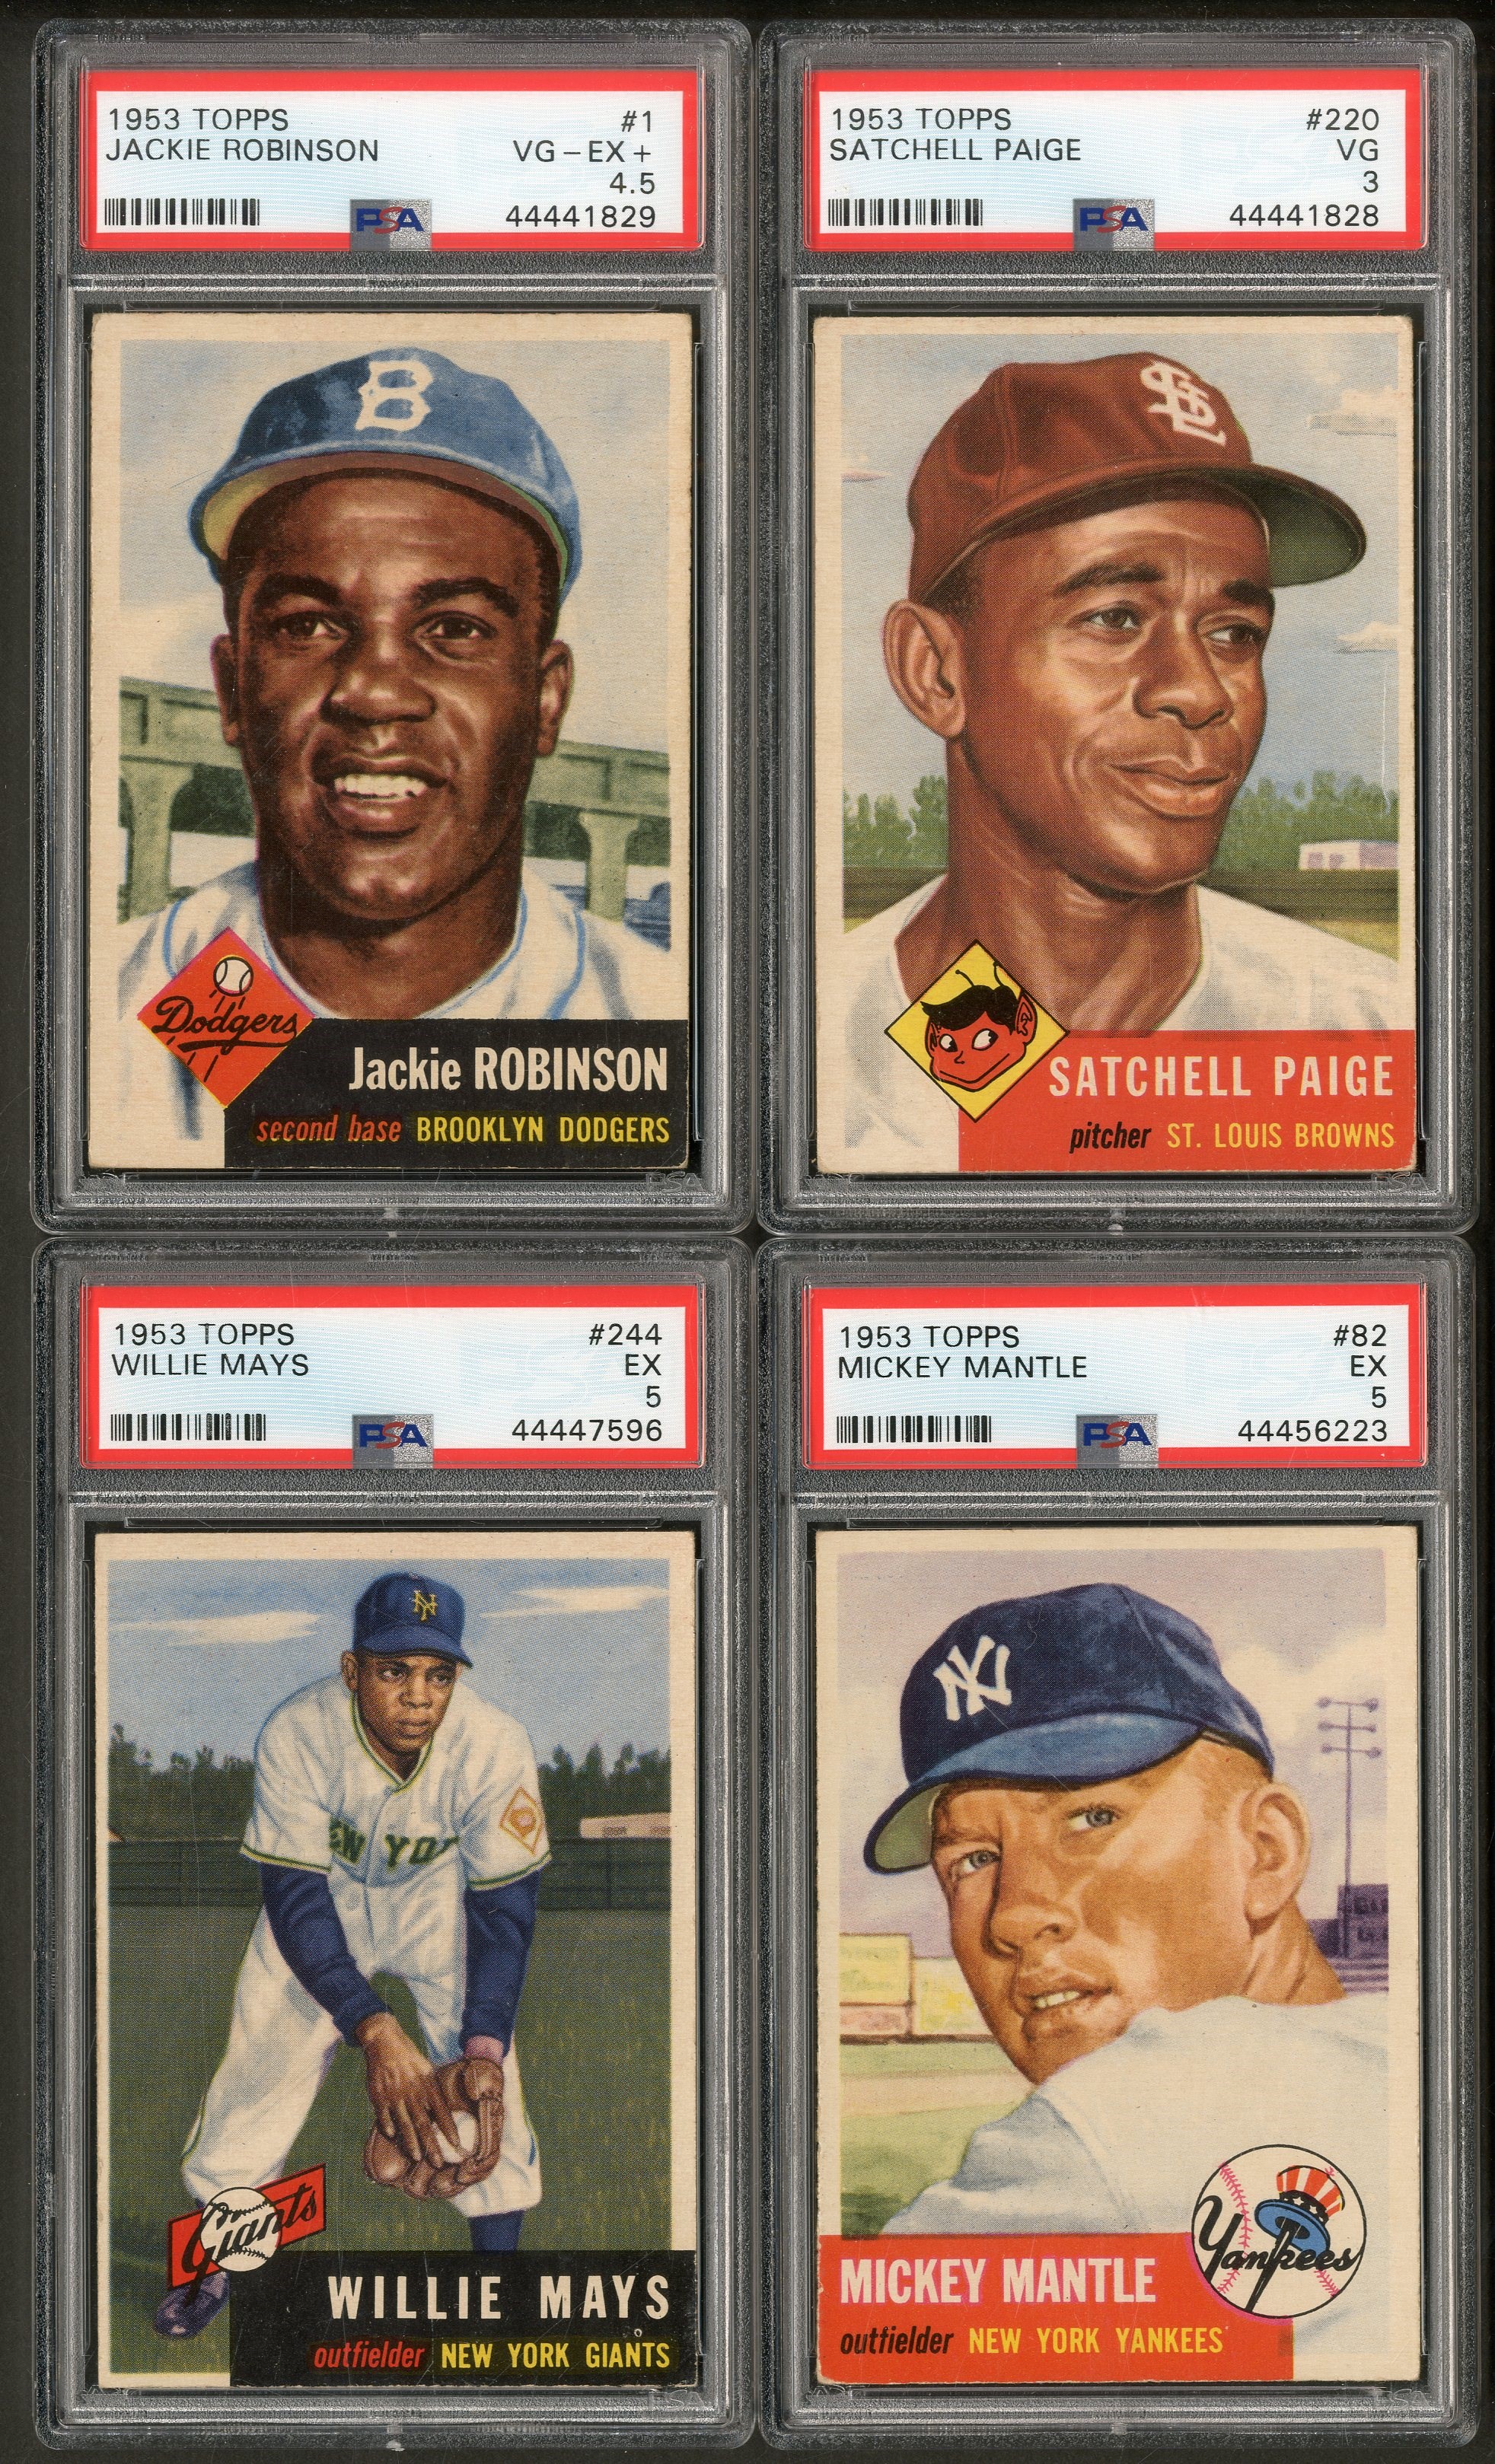 Baseball and Trading Cards - 1953 Topps Near Complete Set with PSA 5 Mantle (265/274)